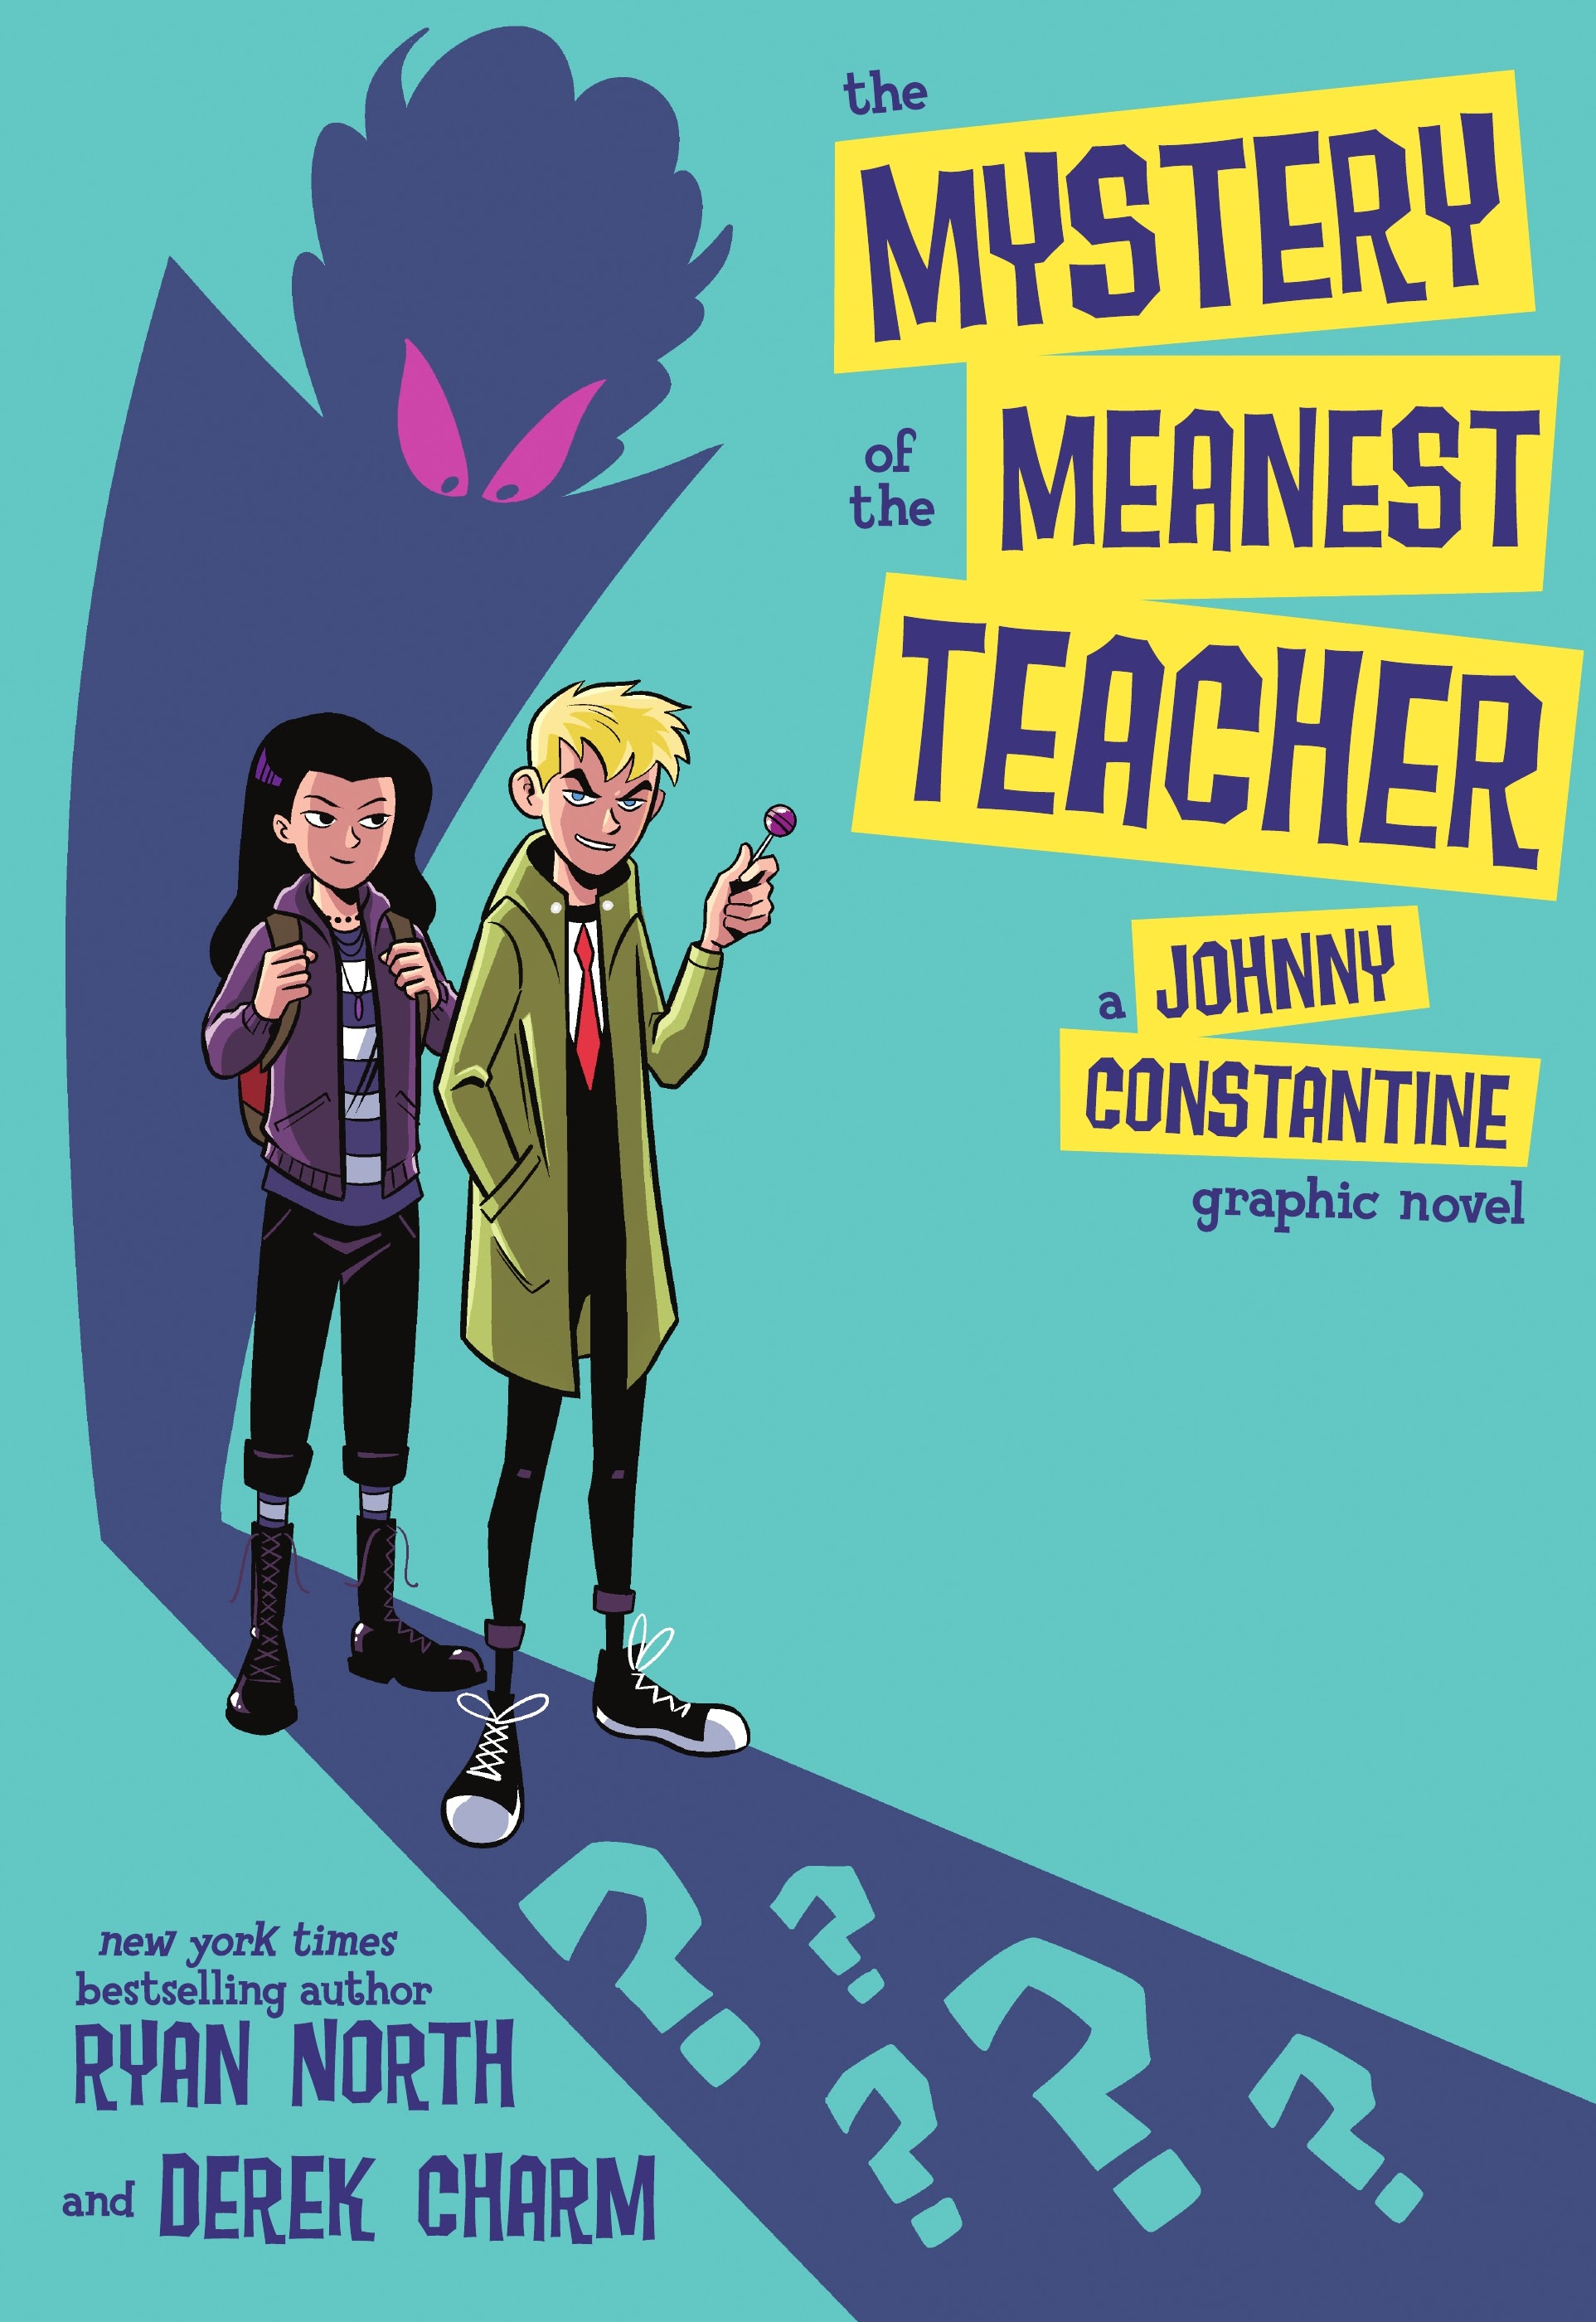 Read online The Mystery of the Meanest Teacher: A Johnny Constantine Graphic Novel comic -  Issue # TPB (Part 1) - 1